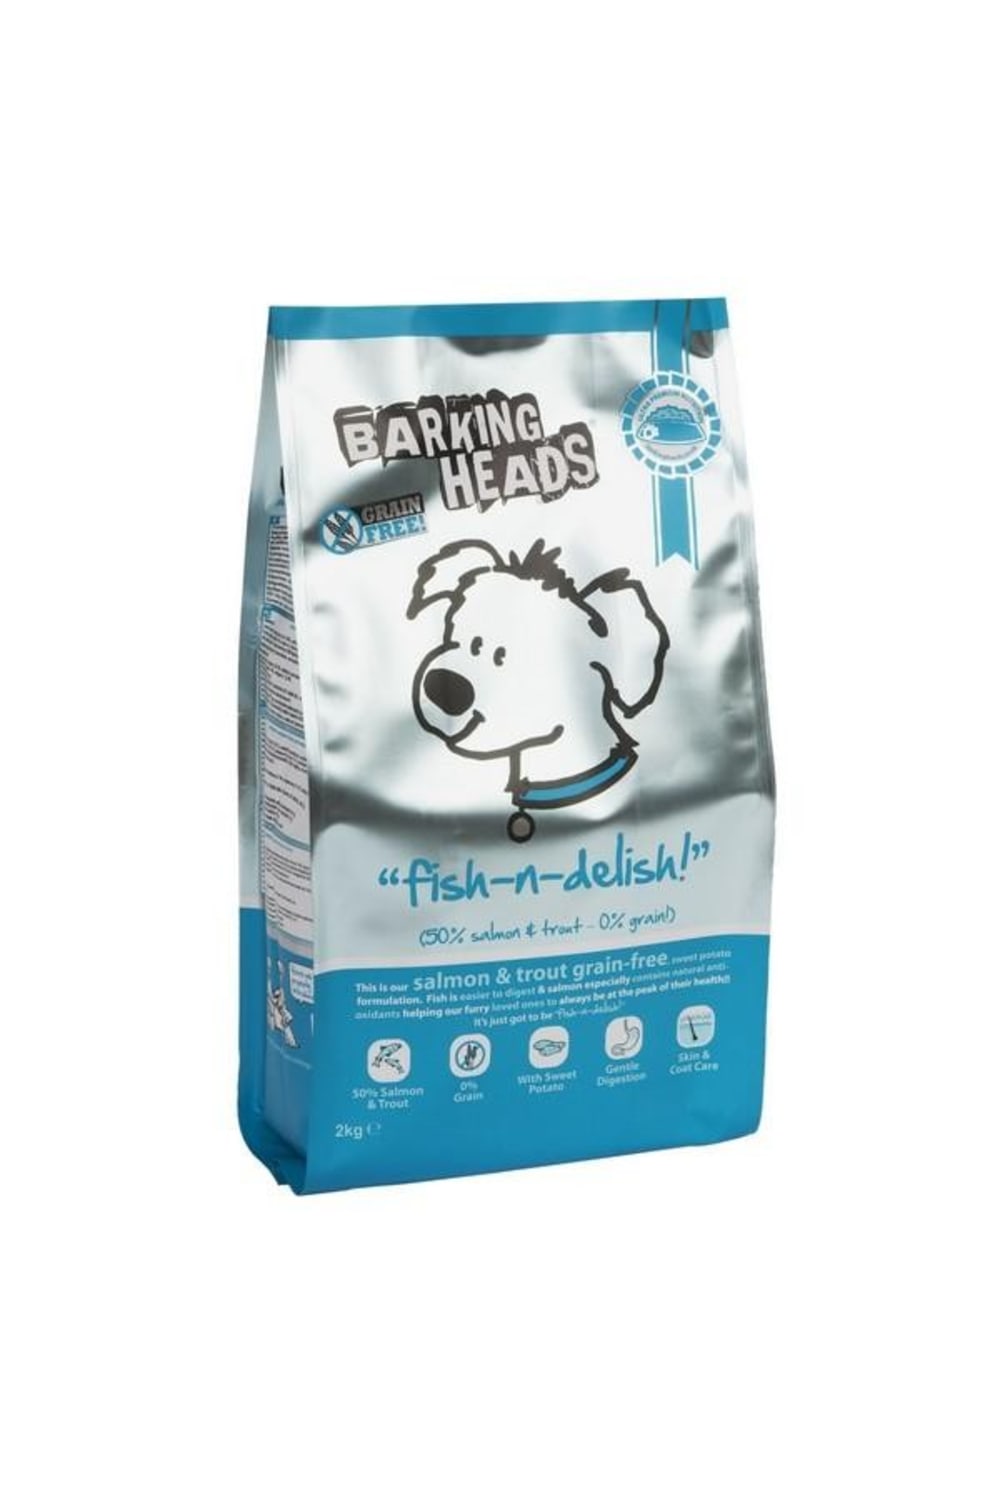 Barking Heads Adult Fish N Delish Grain Free Complete Dry Dog Food (May Vary) (4.4lb)